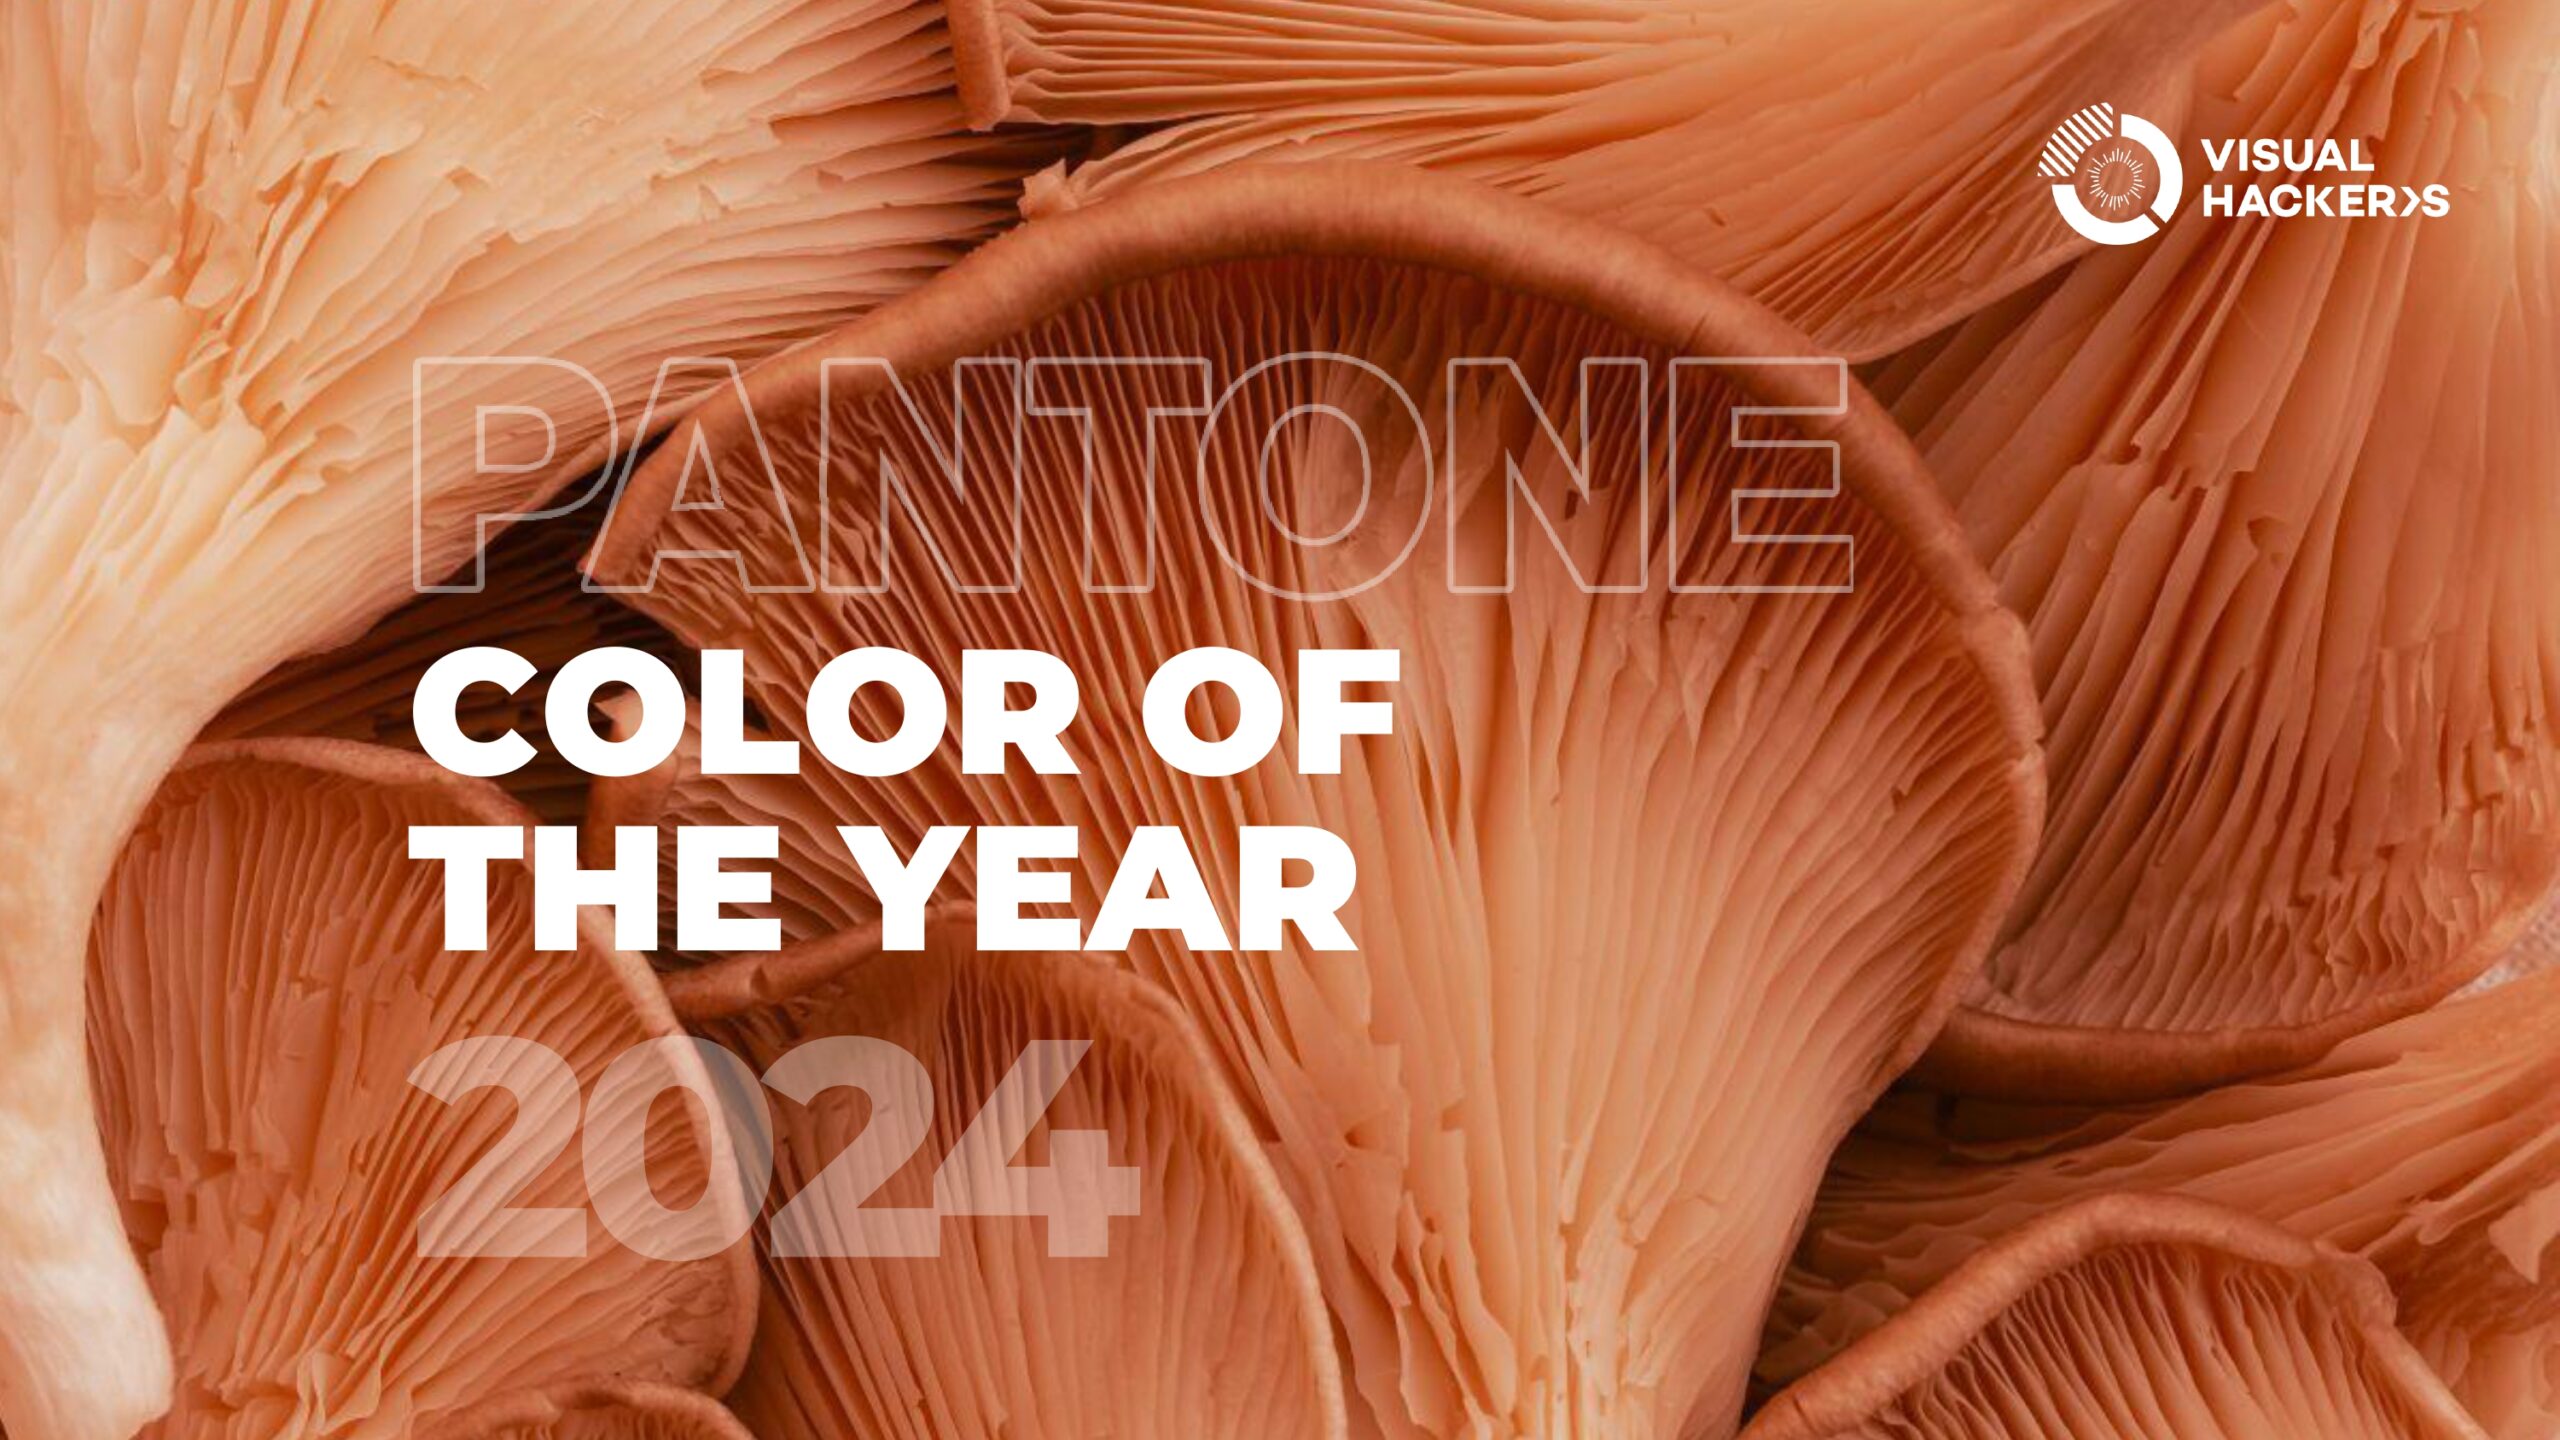 Featured image for “Embrace in design the warmth of Color of the year Peach Fuzz”